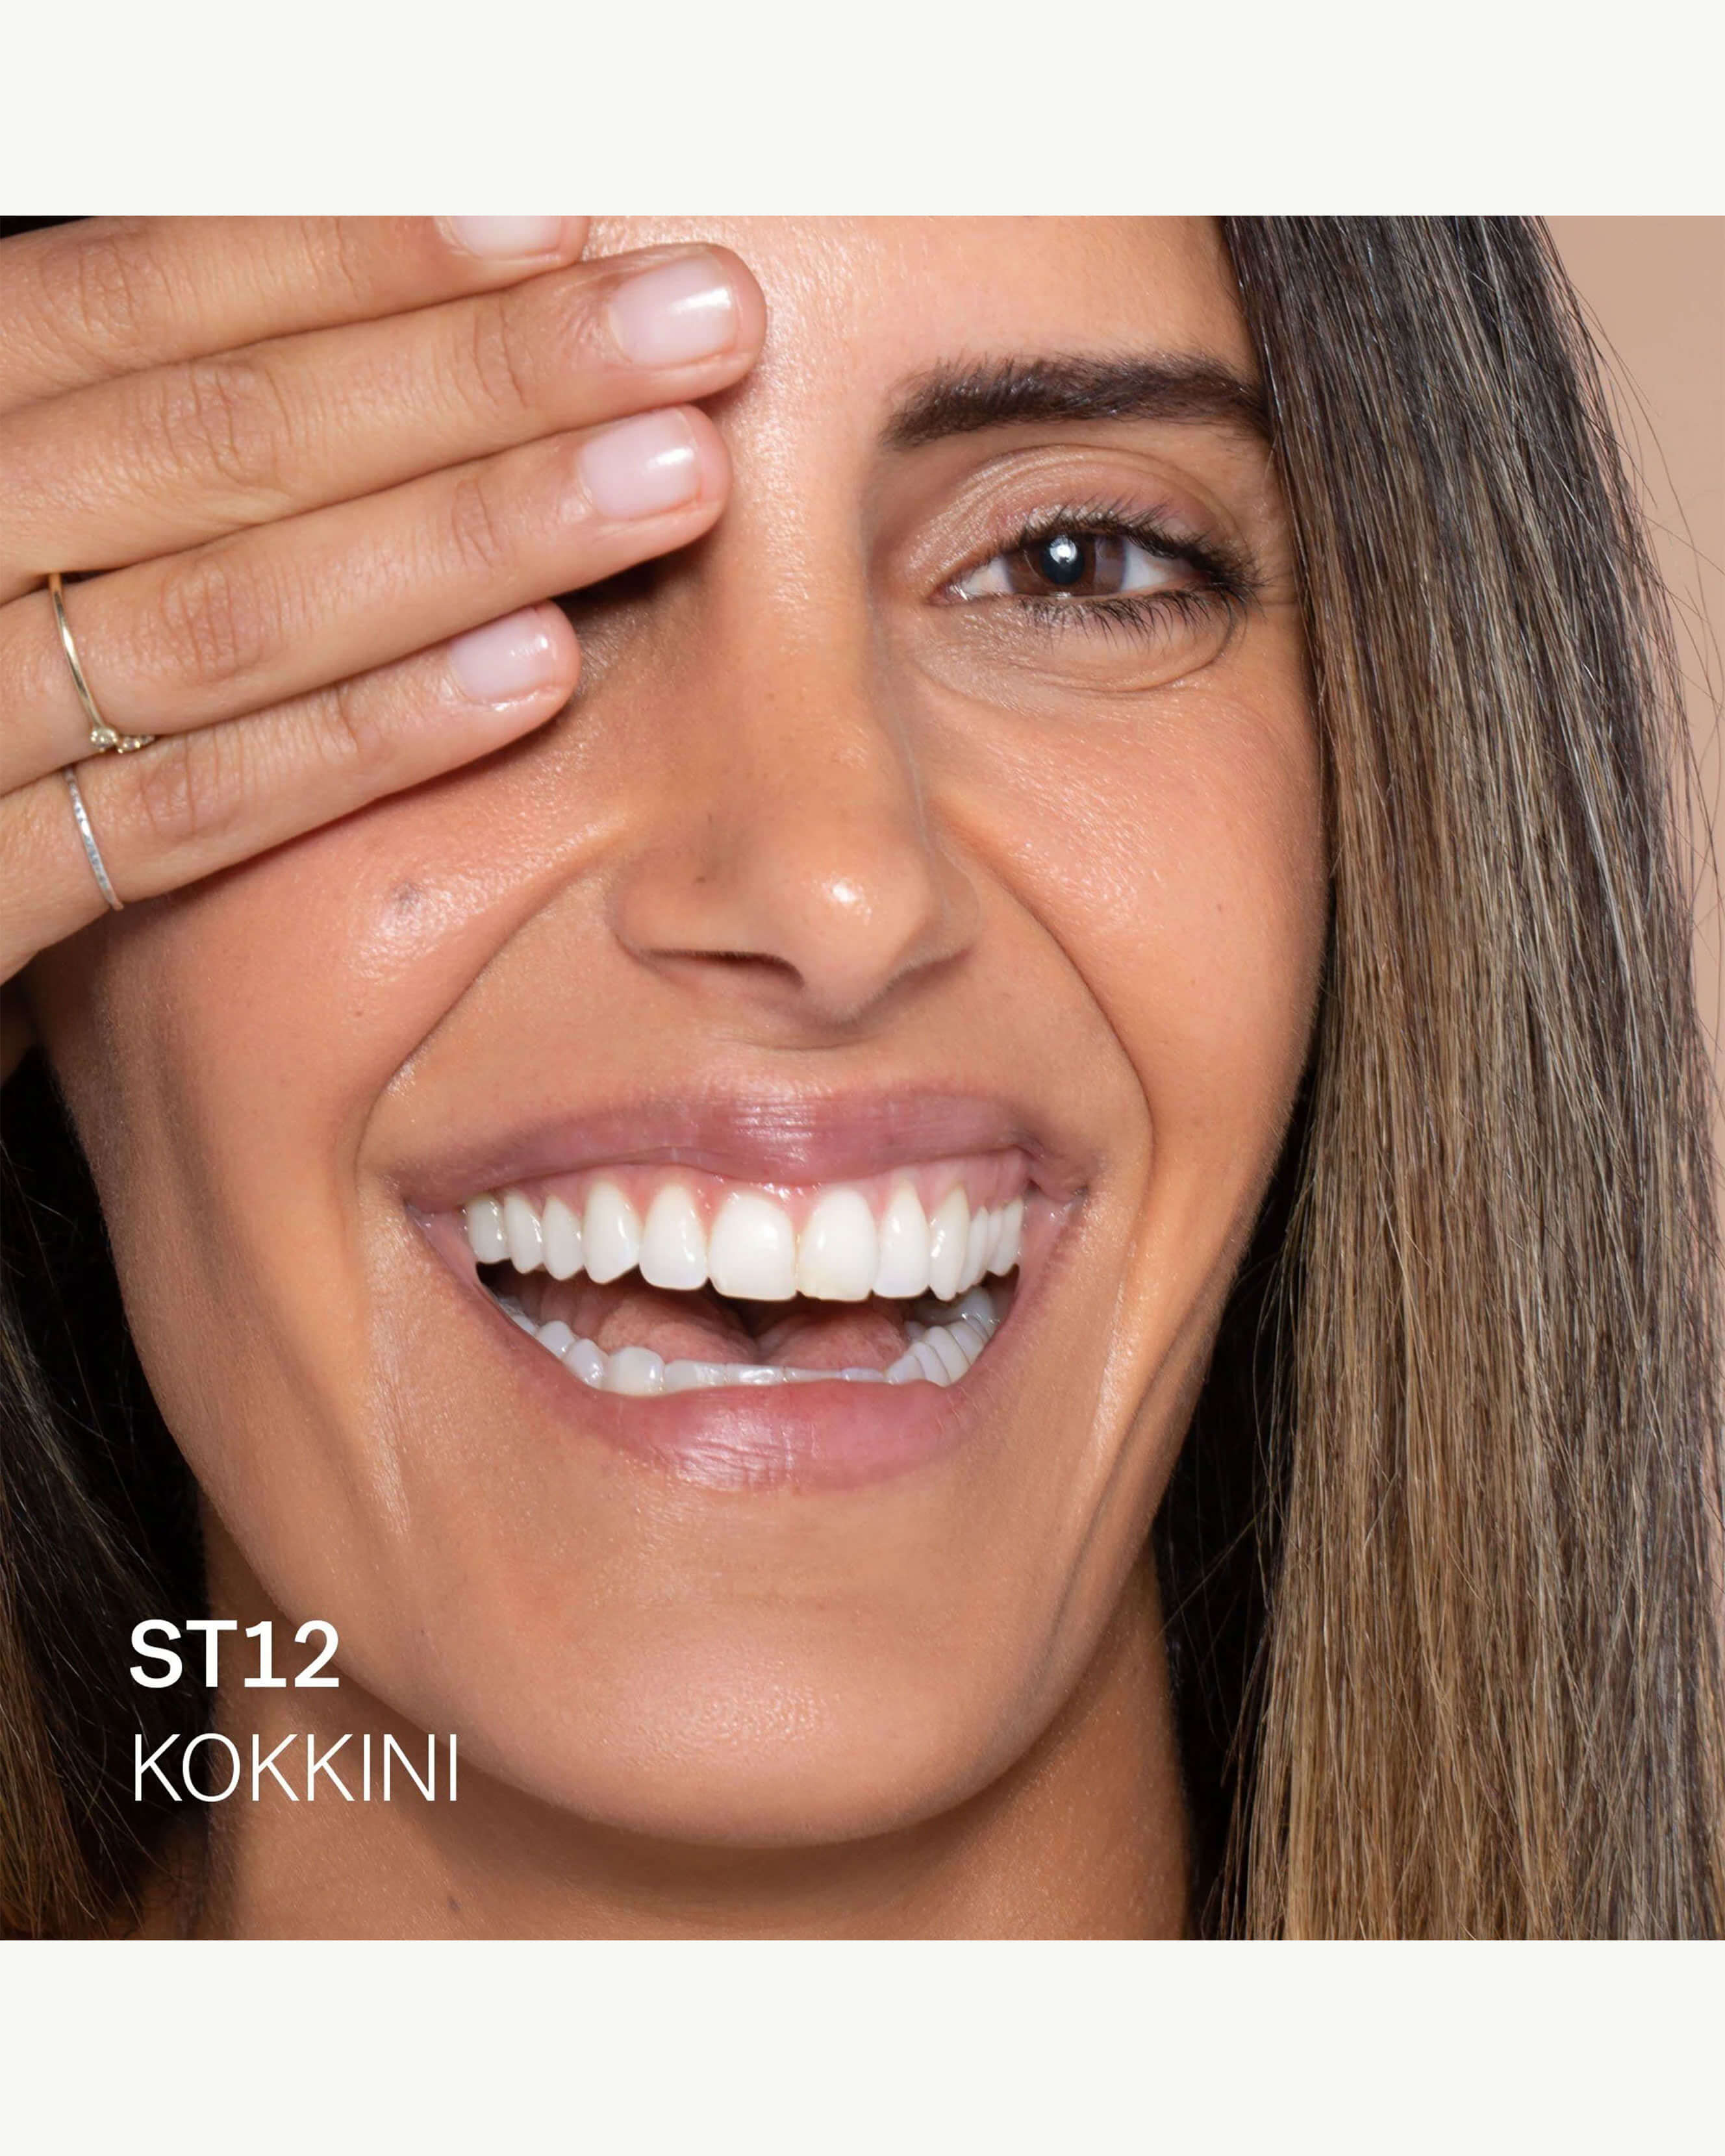 ST12 Kokkini (for tan skin with neutral warm undertones)